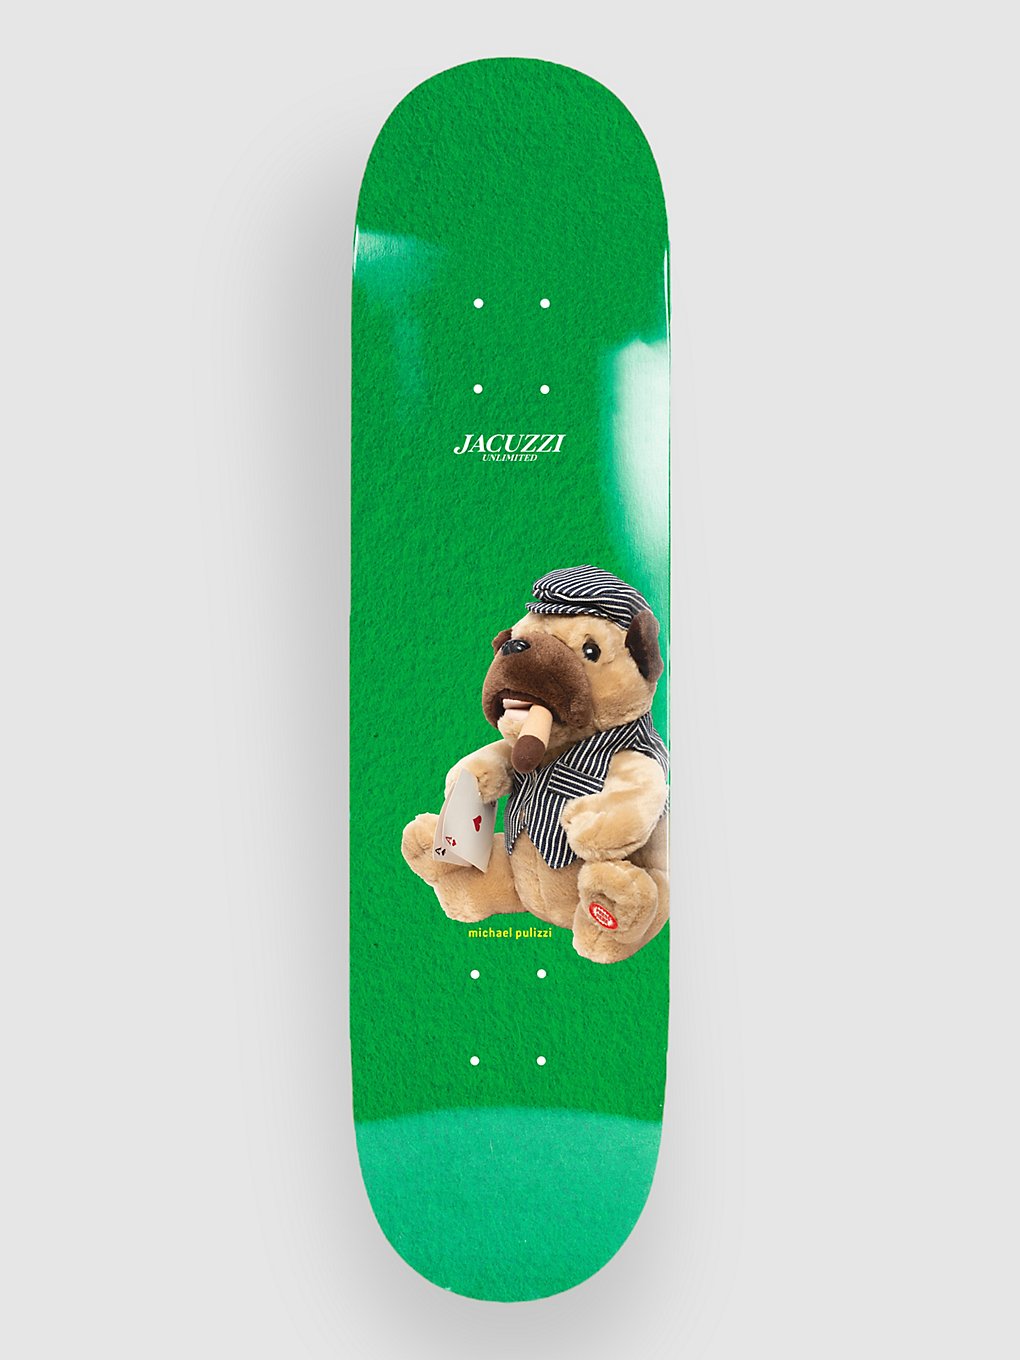 Jacuzzi Unlimited Michael Pulizzi Know When To Hold Em 8.3 Skateboard Deck green kaufen